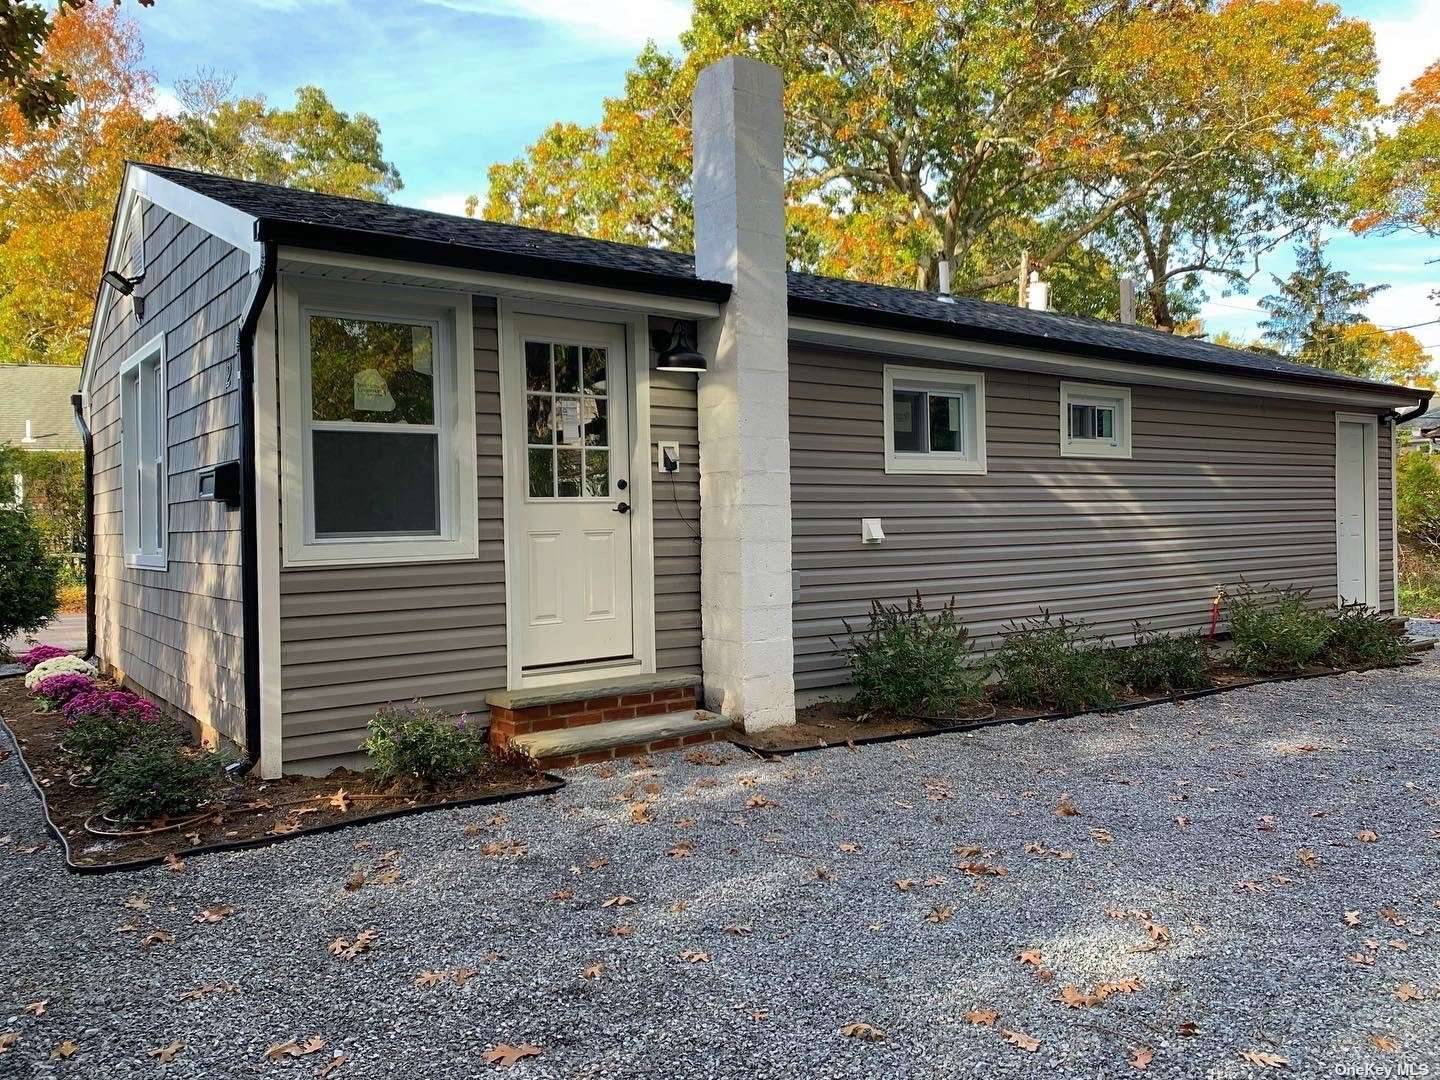 Close to Beach in Sag Harbor This recently renovated adorable beach cottage is walking distance to the beach, restaurants and deli.